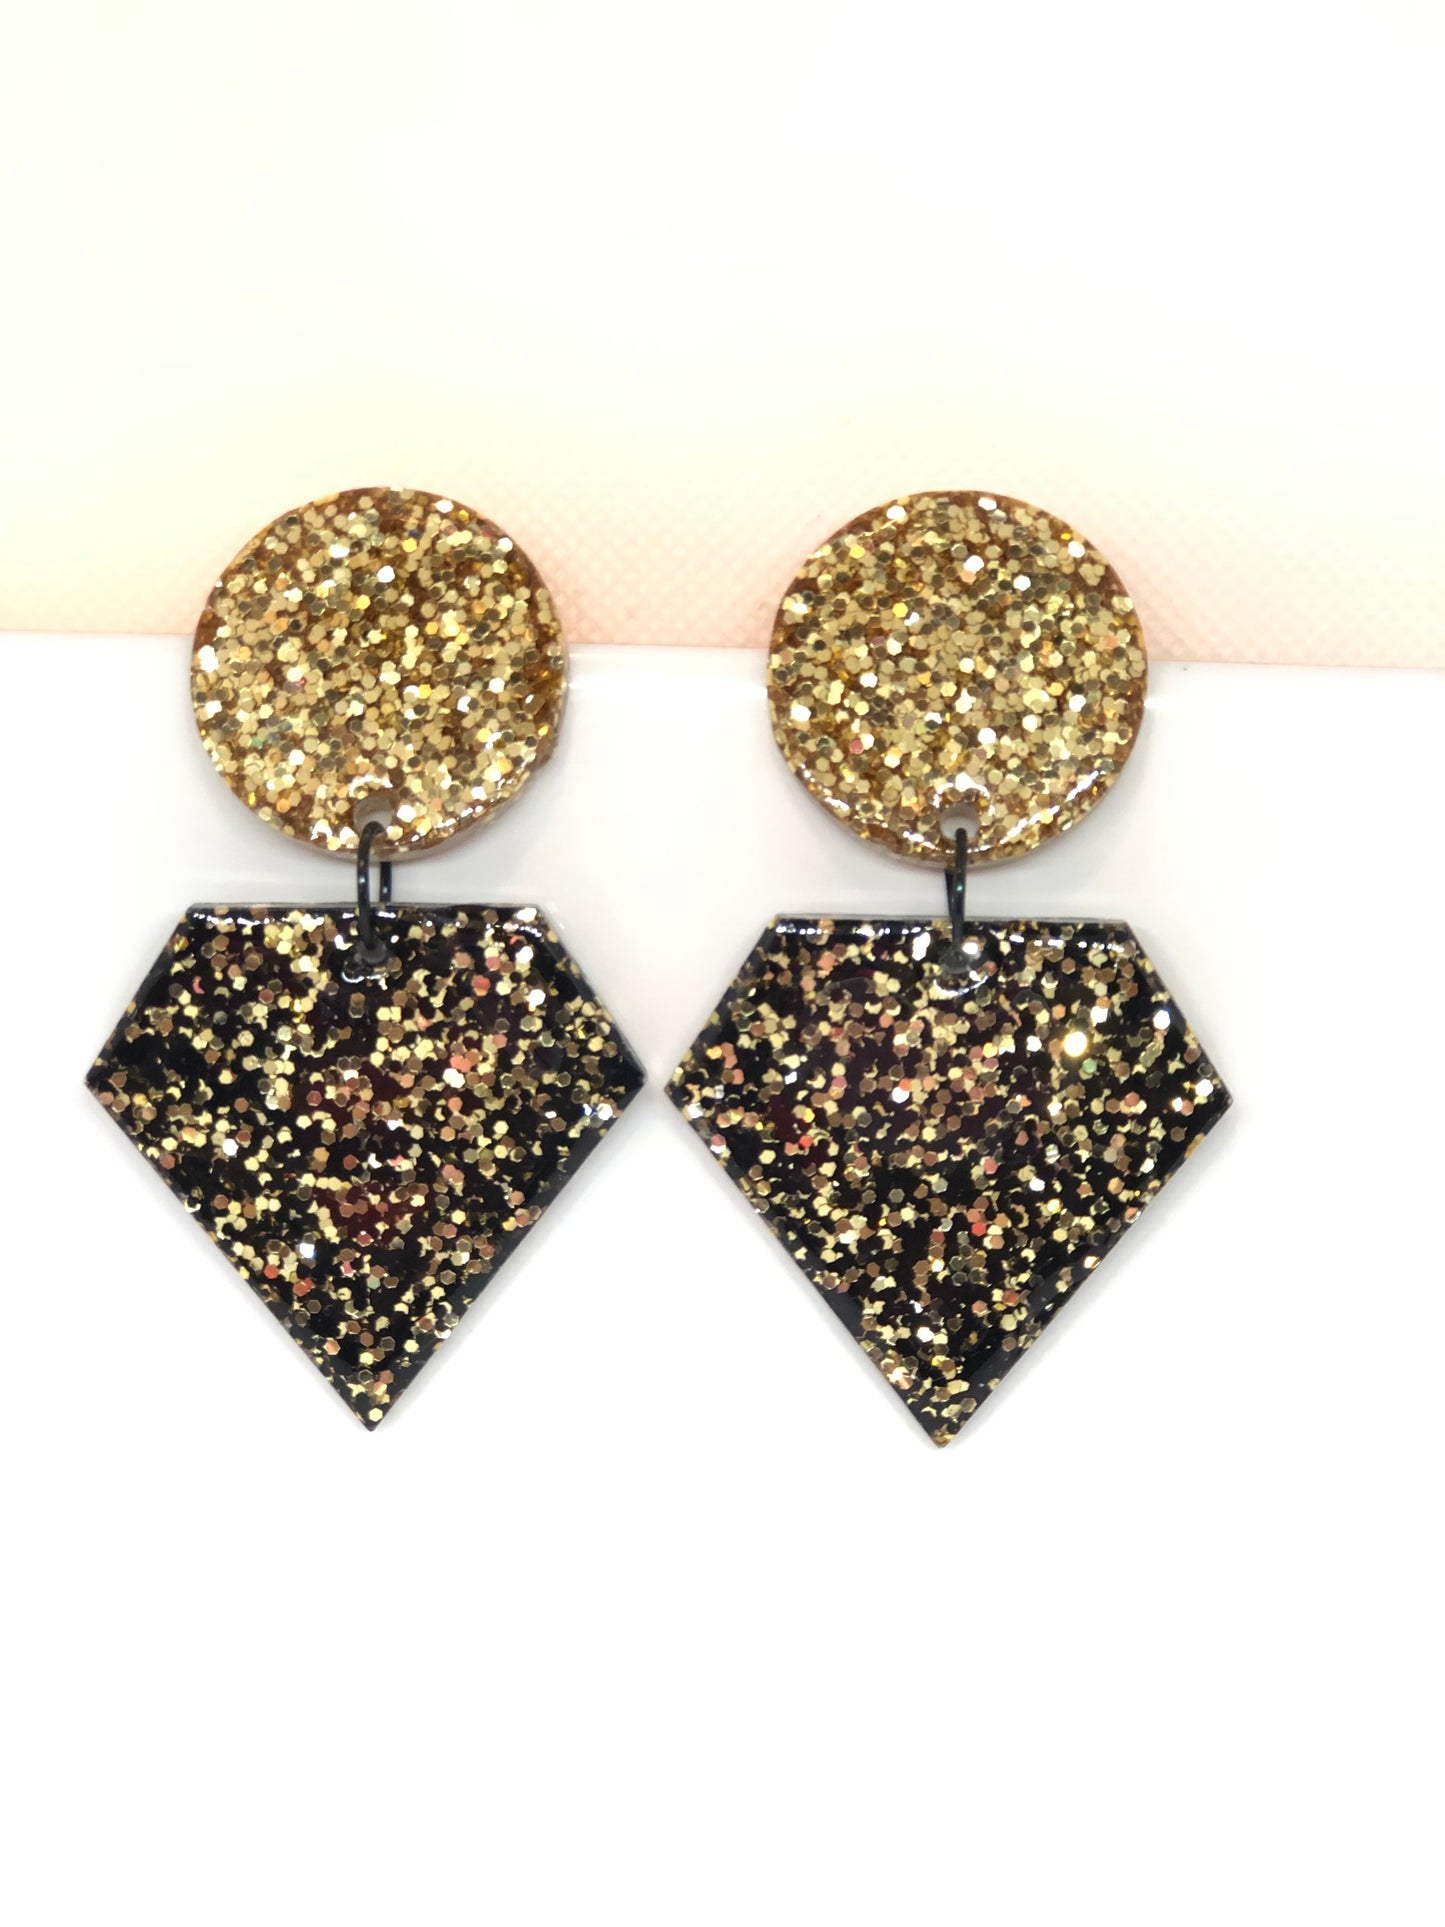 Queen Royalty Glitter Black and Gold Color Studs #1 - lightweight